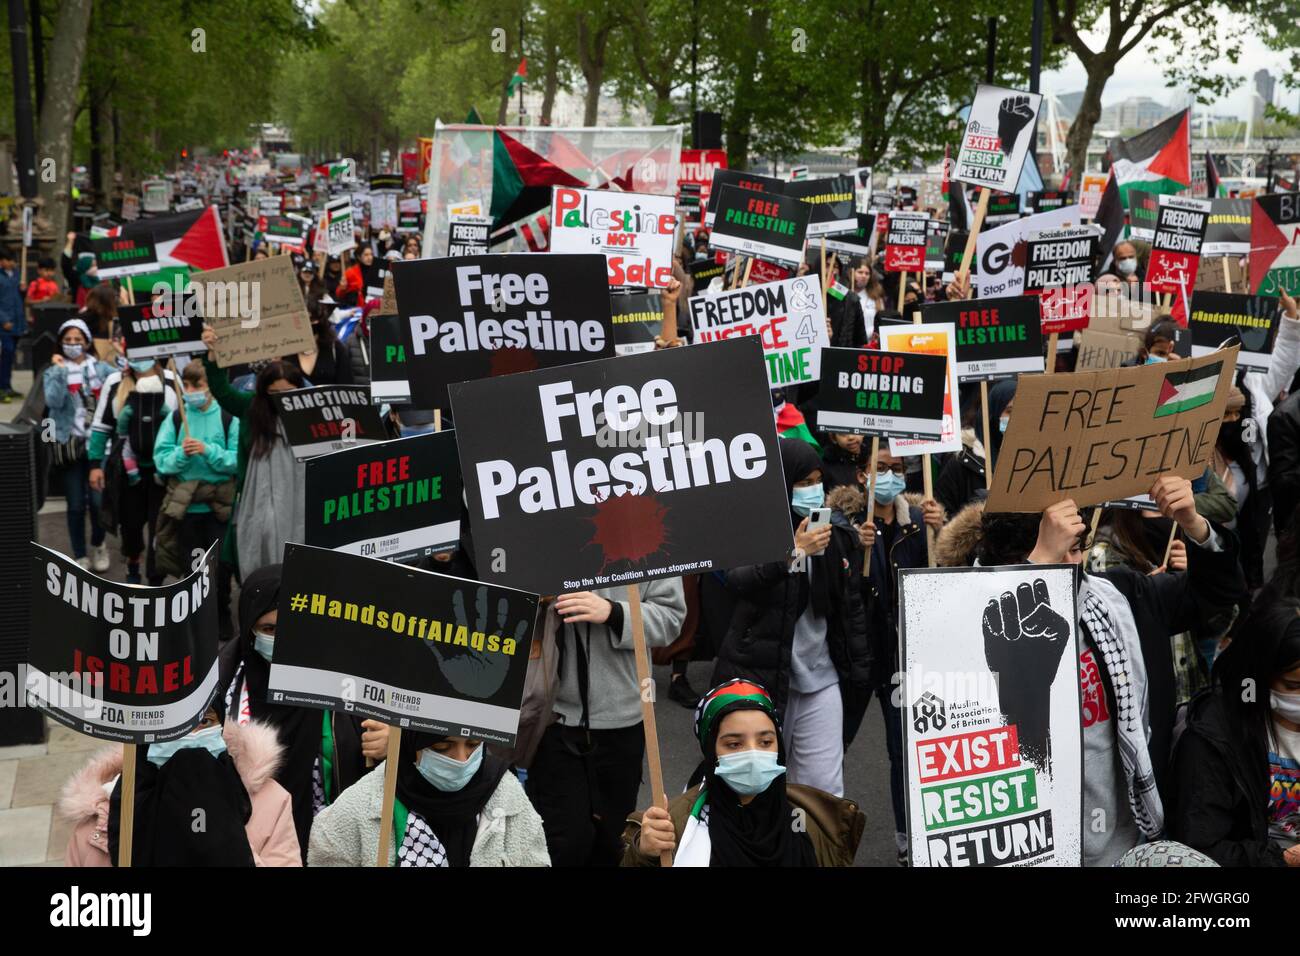 London, UK. 22nd May, 2021. A Pro Palestinian march sets off from Embankment to a rally in Hyde Park with speeches. People are angry at the bombing by Israel and are asking the British Govermnent to take action. They feel that the attacks by Israel have been disproportionate with most of the 250 deaths being Palestinians. Even though there is now a ceasefire, they want action from the British and American Governments. Credit: Mark Thomas/Alamy Live News Stock Photo